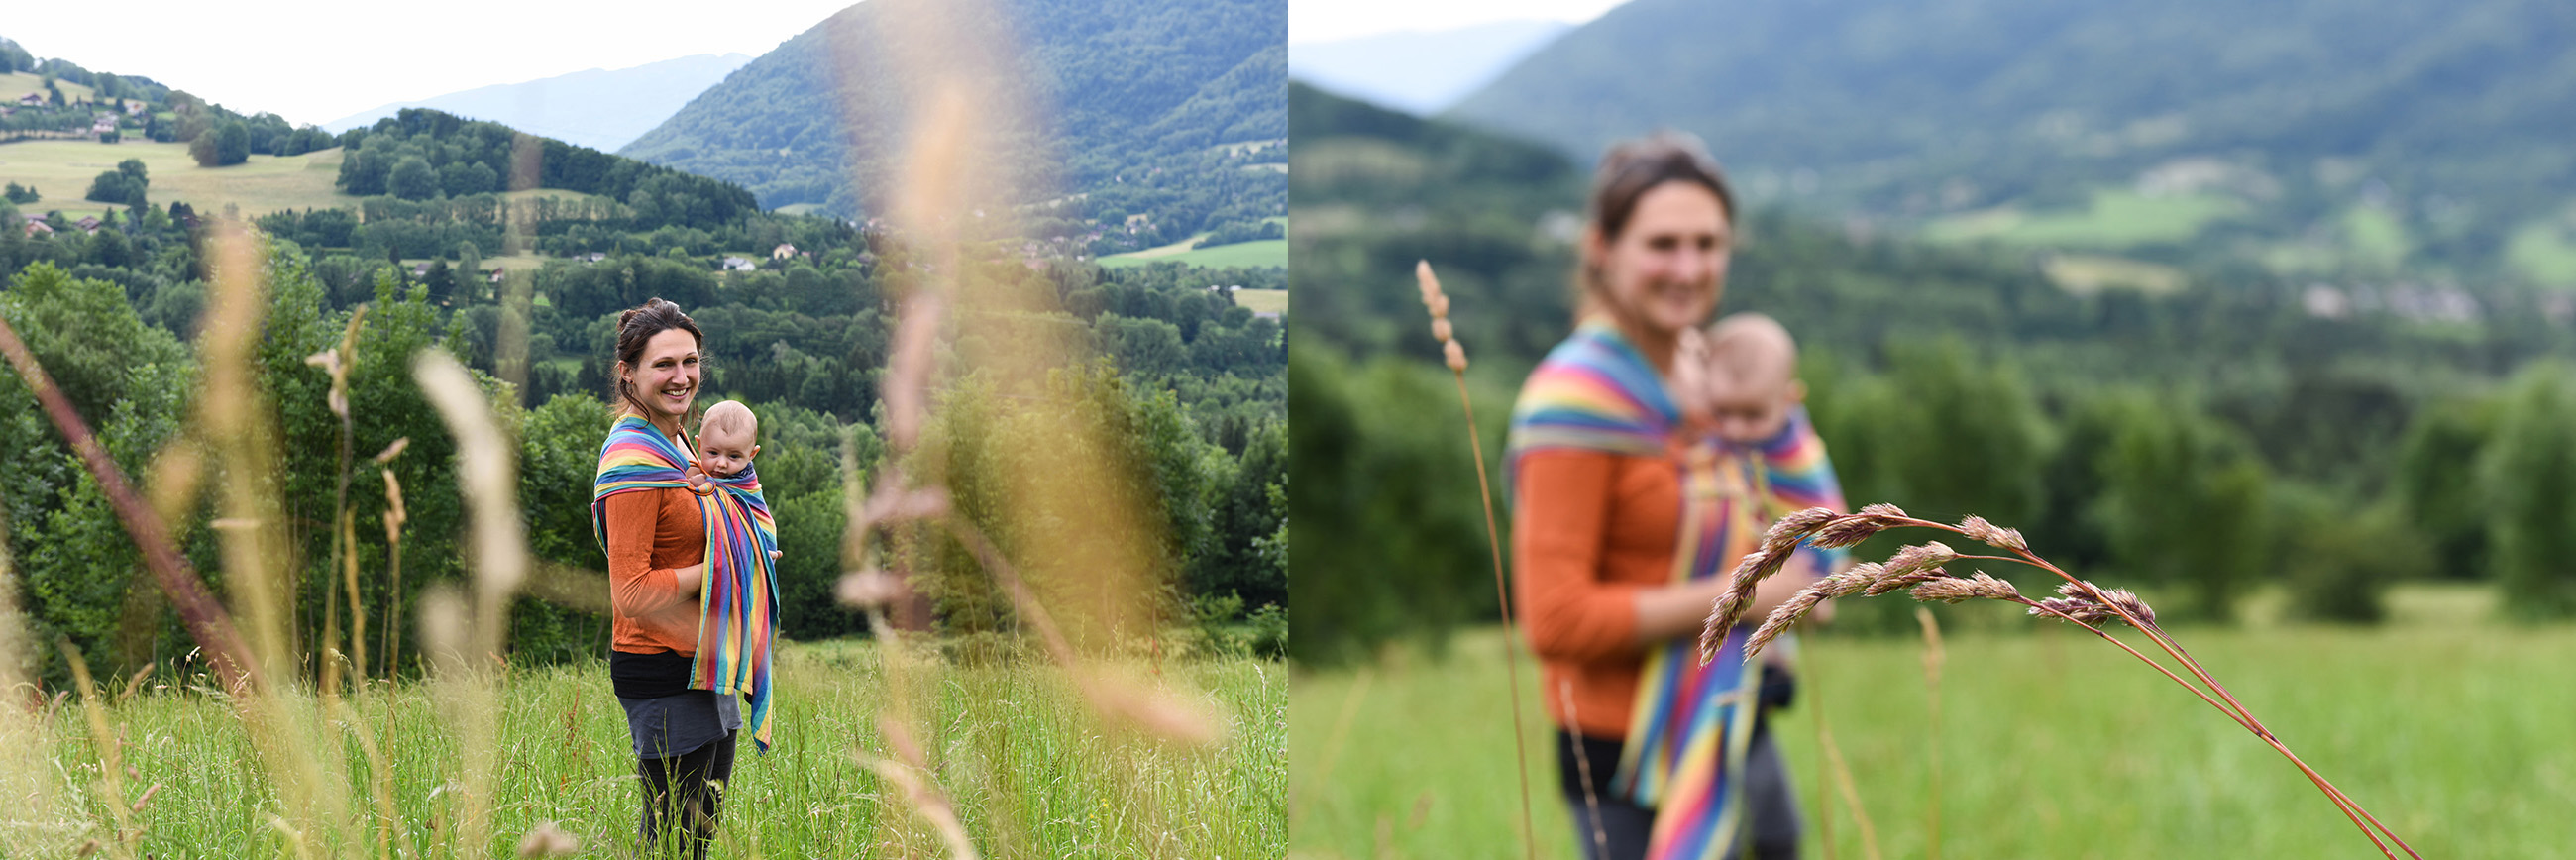 Diptych In a beautiful landscape and high grass a mommy holding her young baby with a scarf